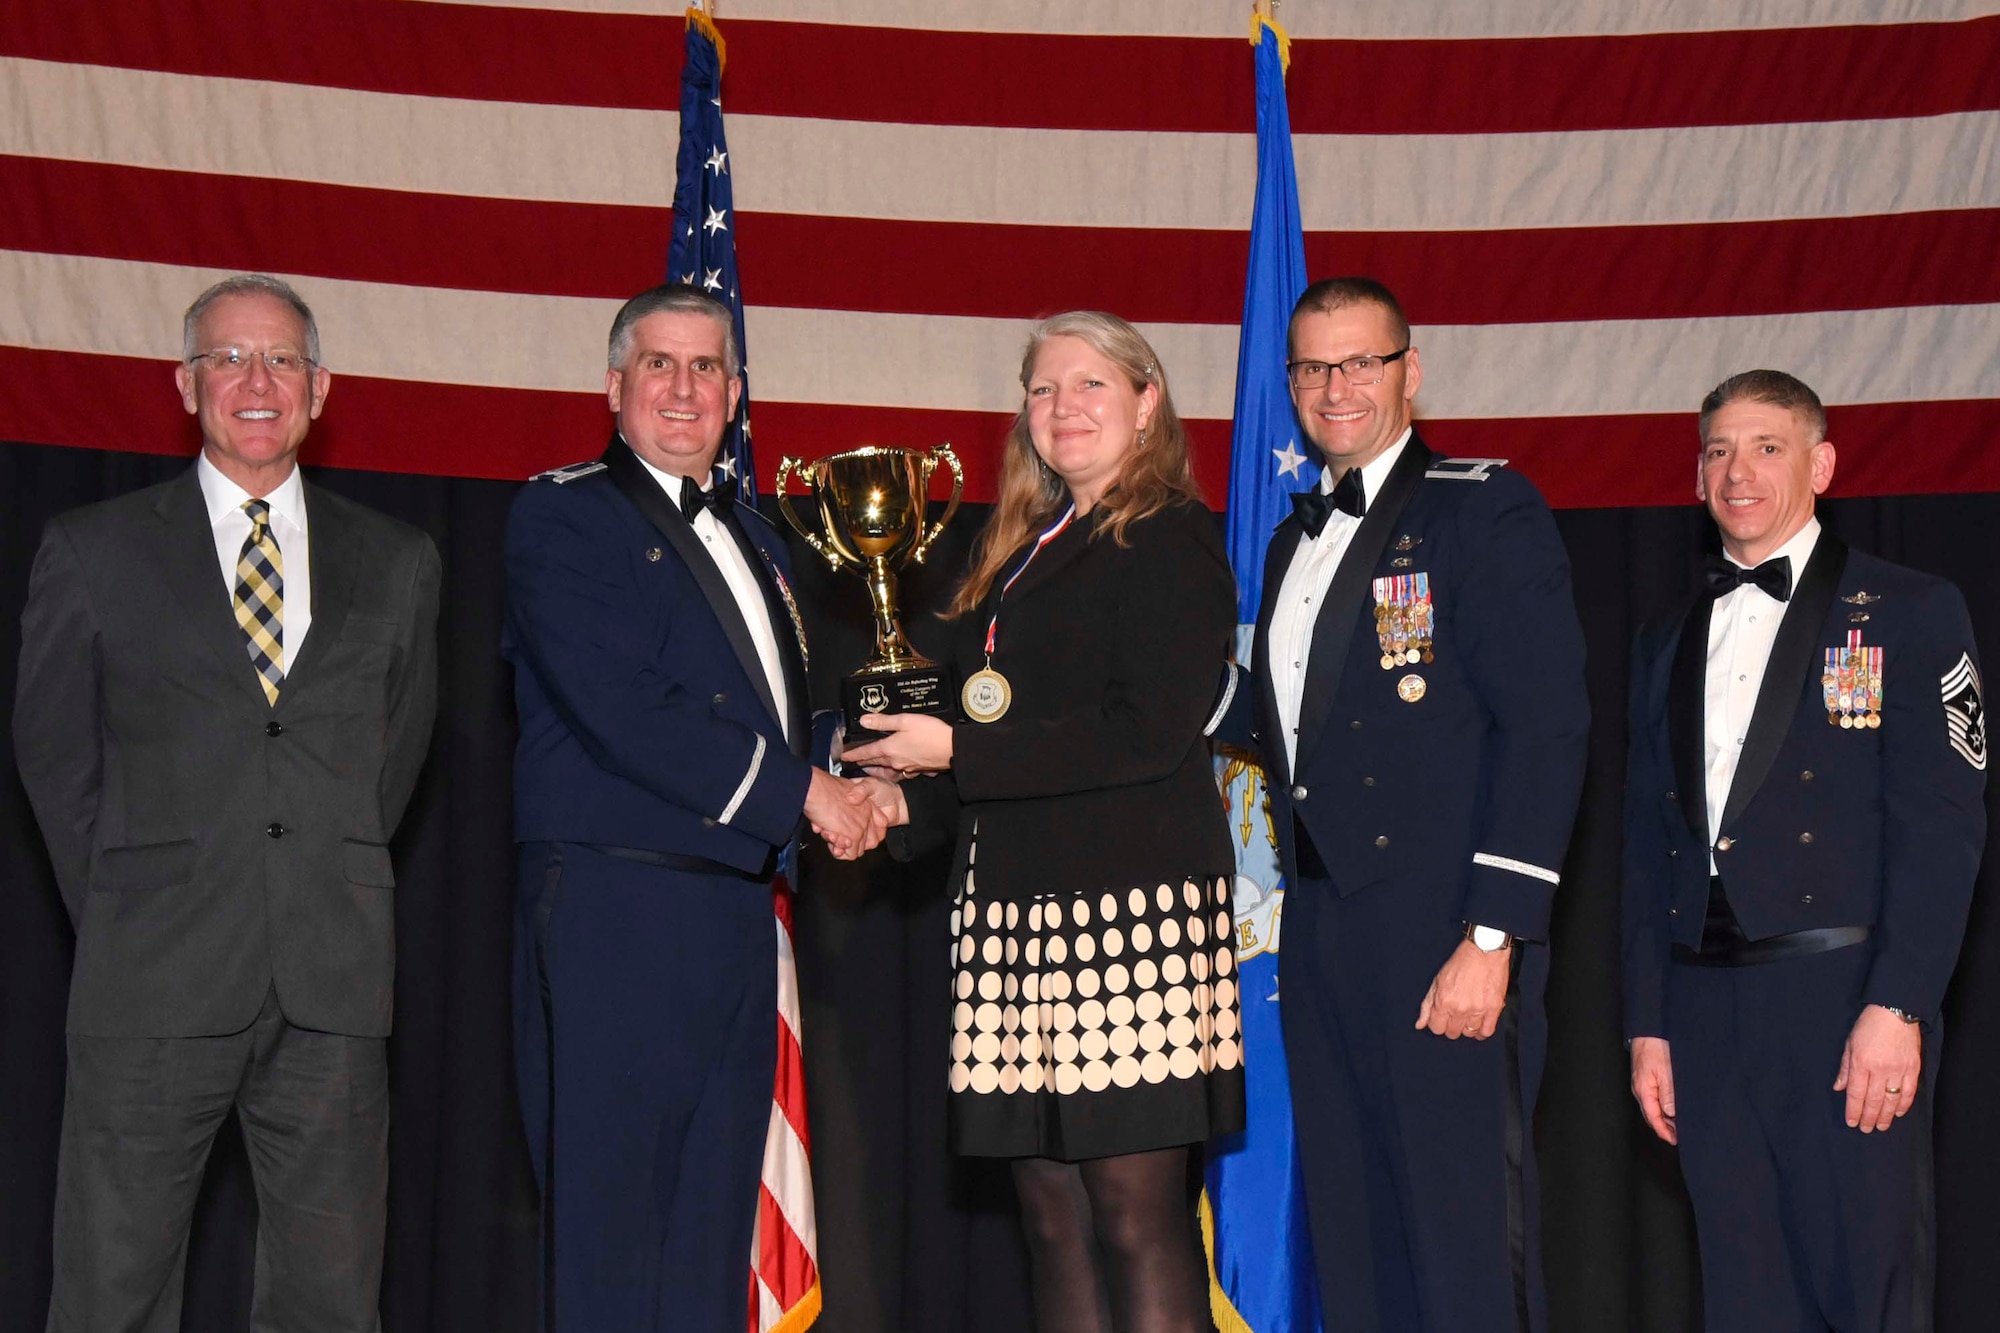 Nancy A. Adams, 22nd Force Support Squadron, center, accepts the 2016 Civilian Category III of the Year award, Feb. 3, 2017, at McConnell Air Force Base, Kan. The annual awards ceremony recognized military and civilian members who excel in their areas of responsibilities, leadership qualities, community involvement, self-improvement and innovation from January to December 2016. (U.S. Air Force photo/Senior Airman Christopher Thornbury)